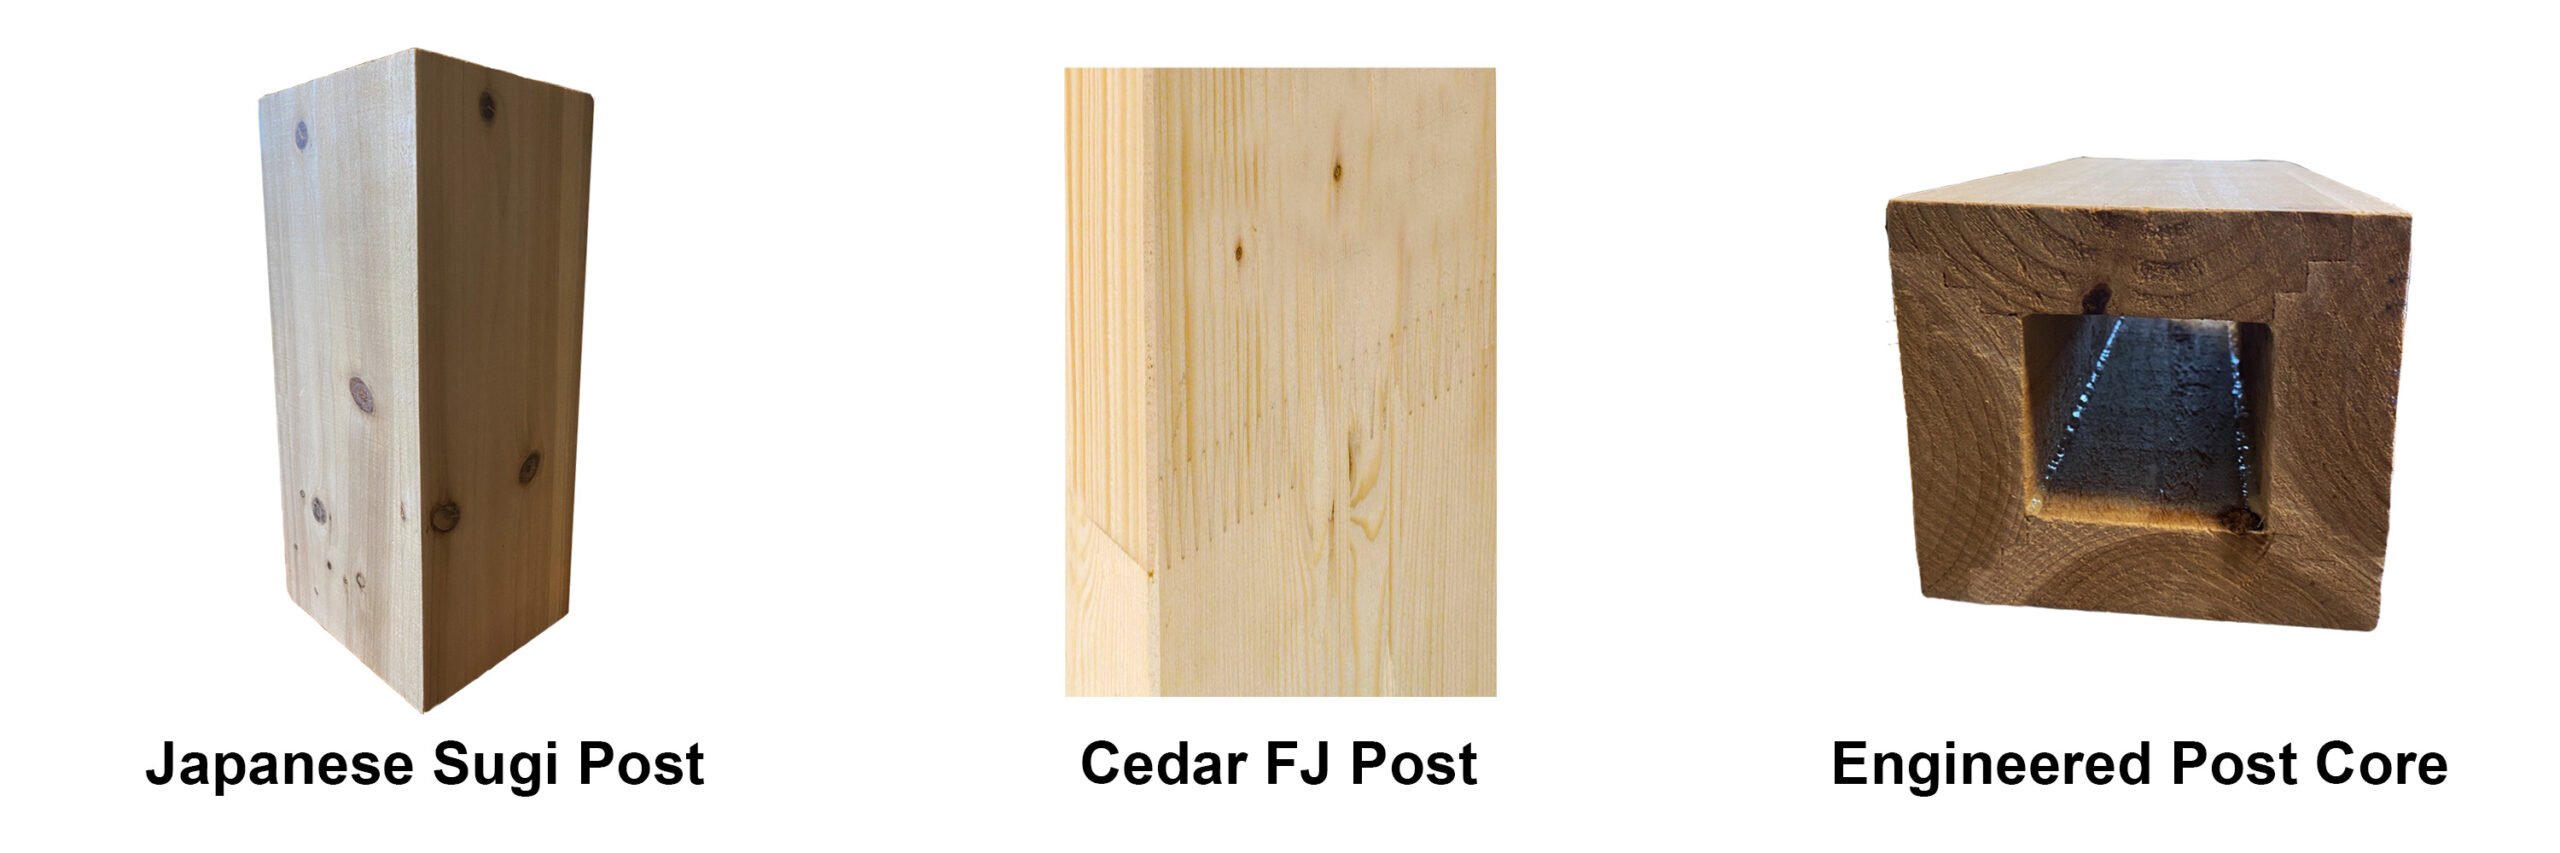 What is Sugi & How Does it Compare to Western Red Cedar?